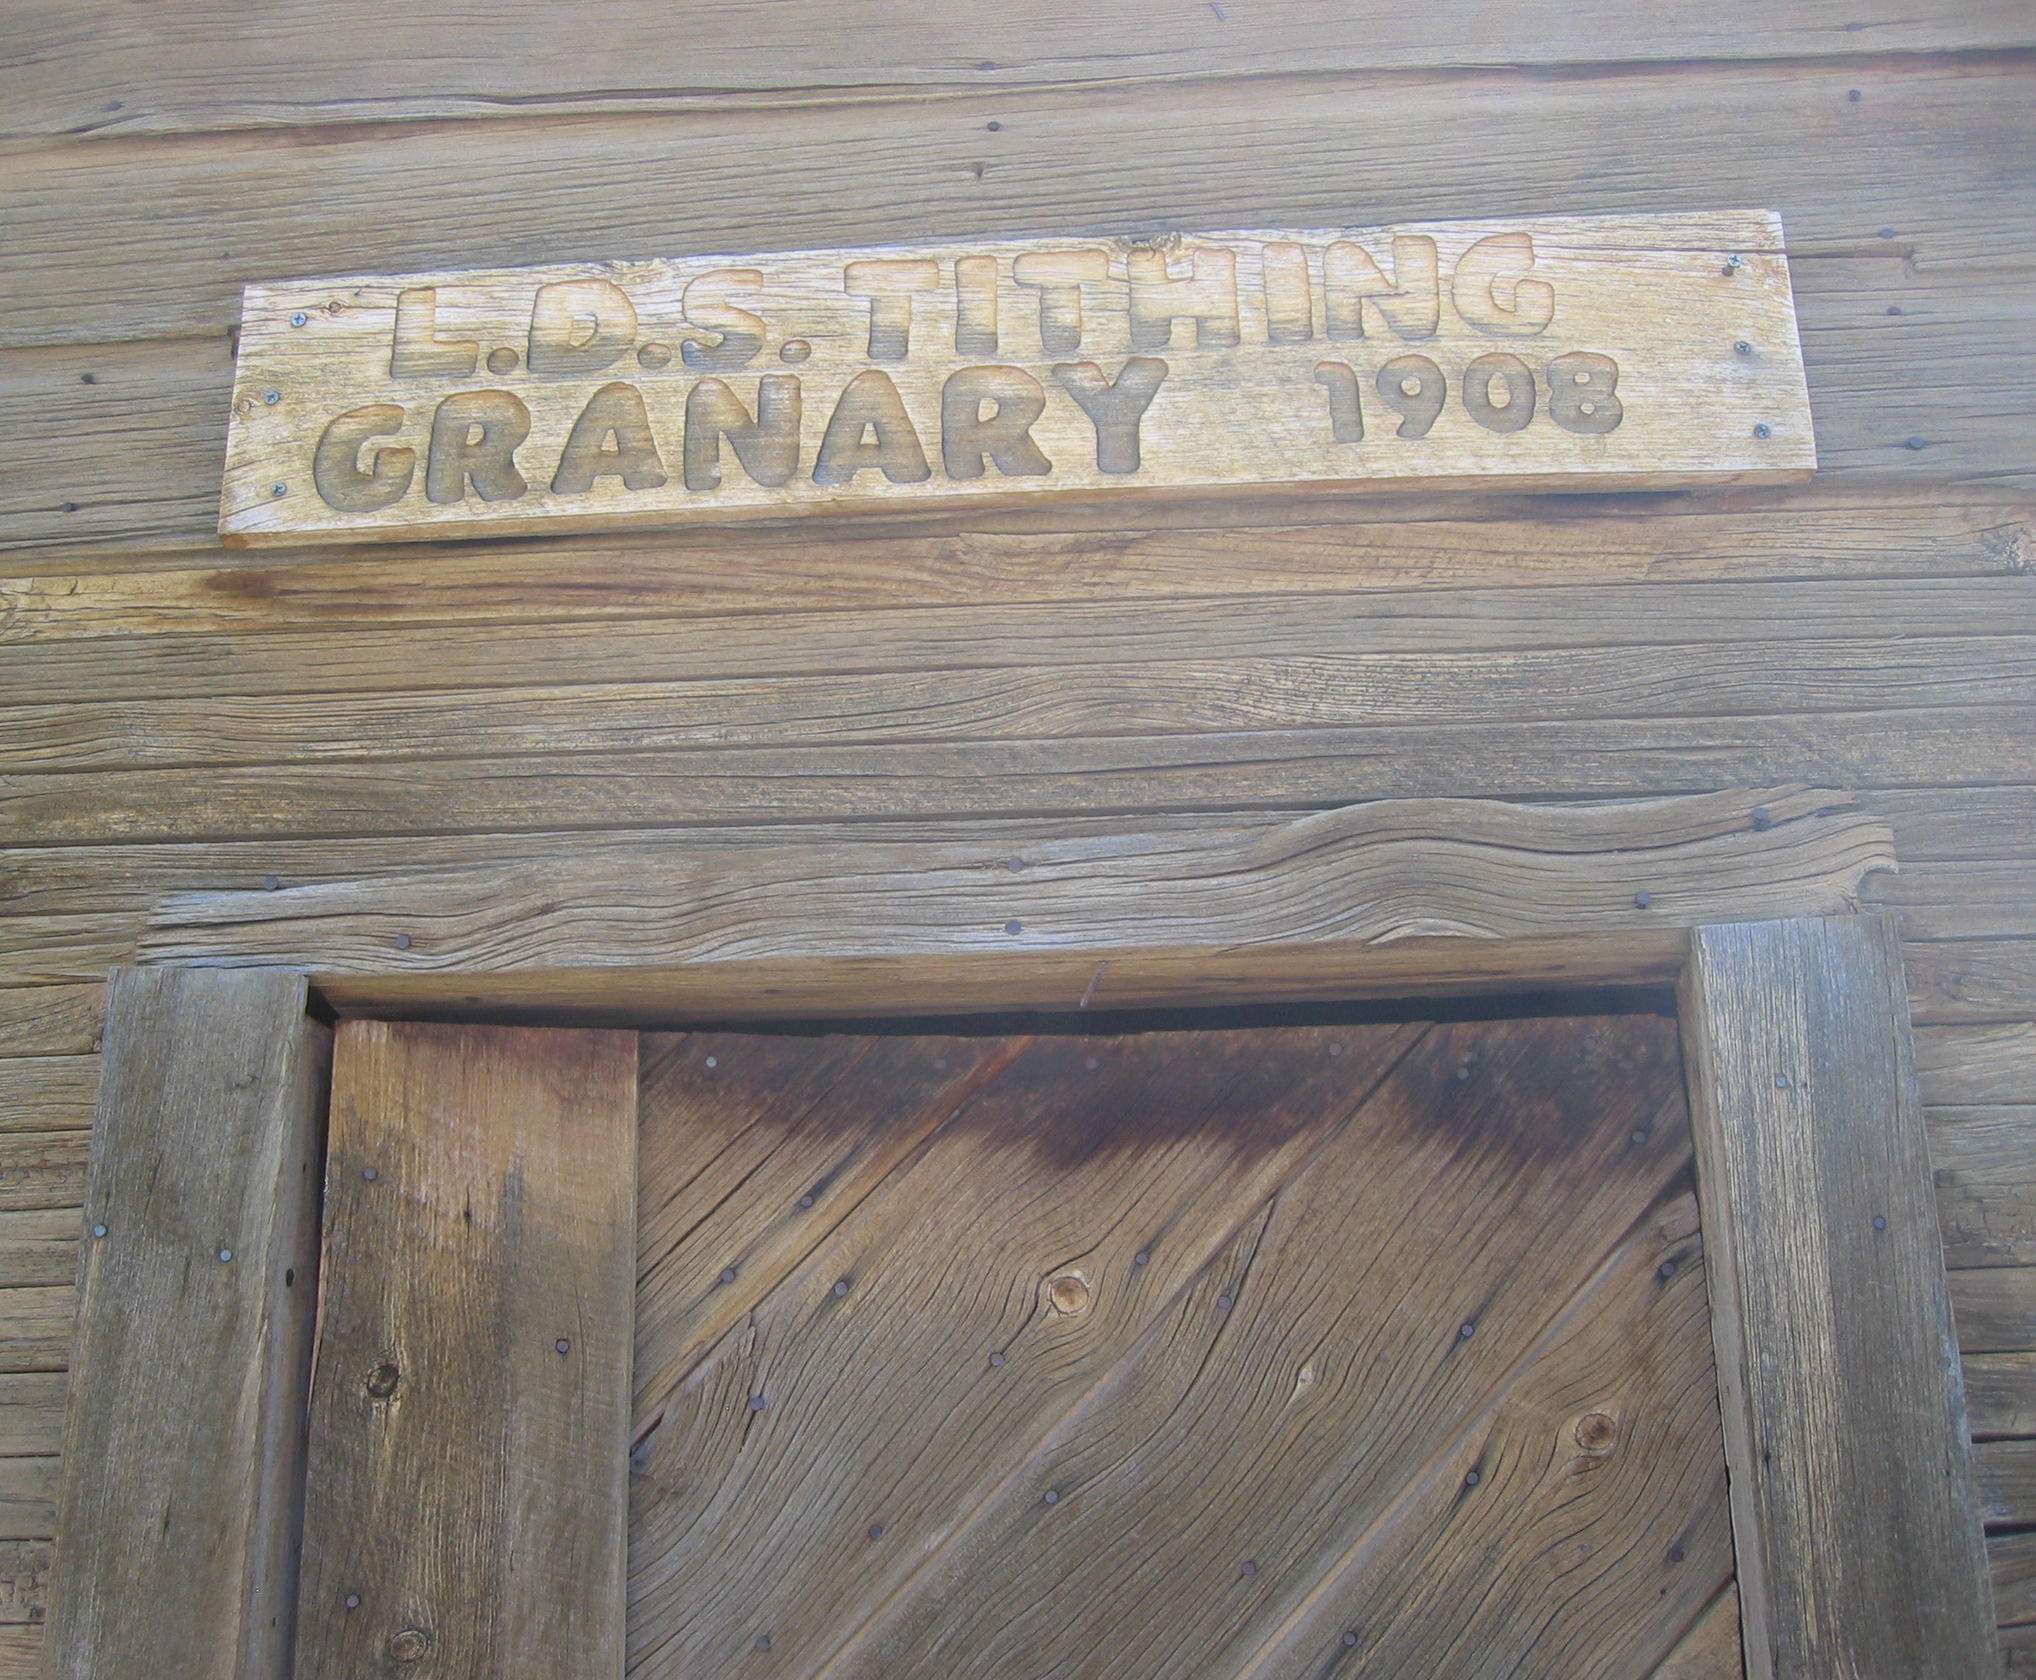 Sign above the door of the Enterprise Ward Tithing Granary